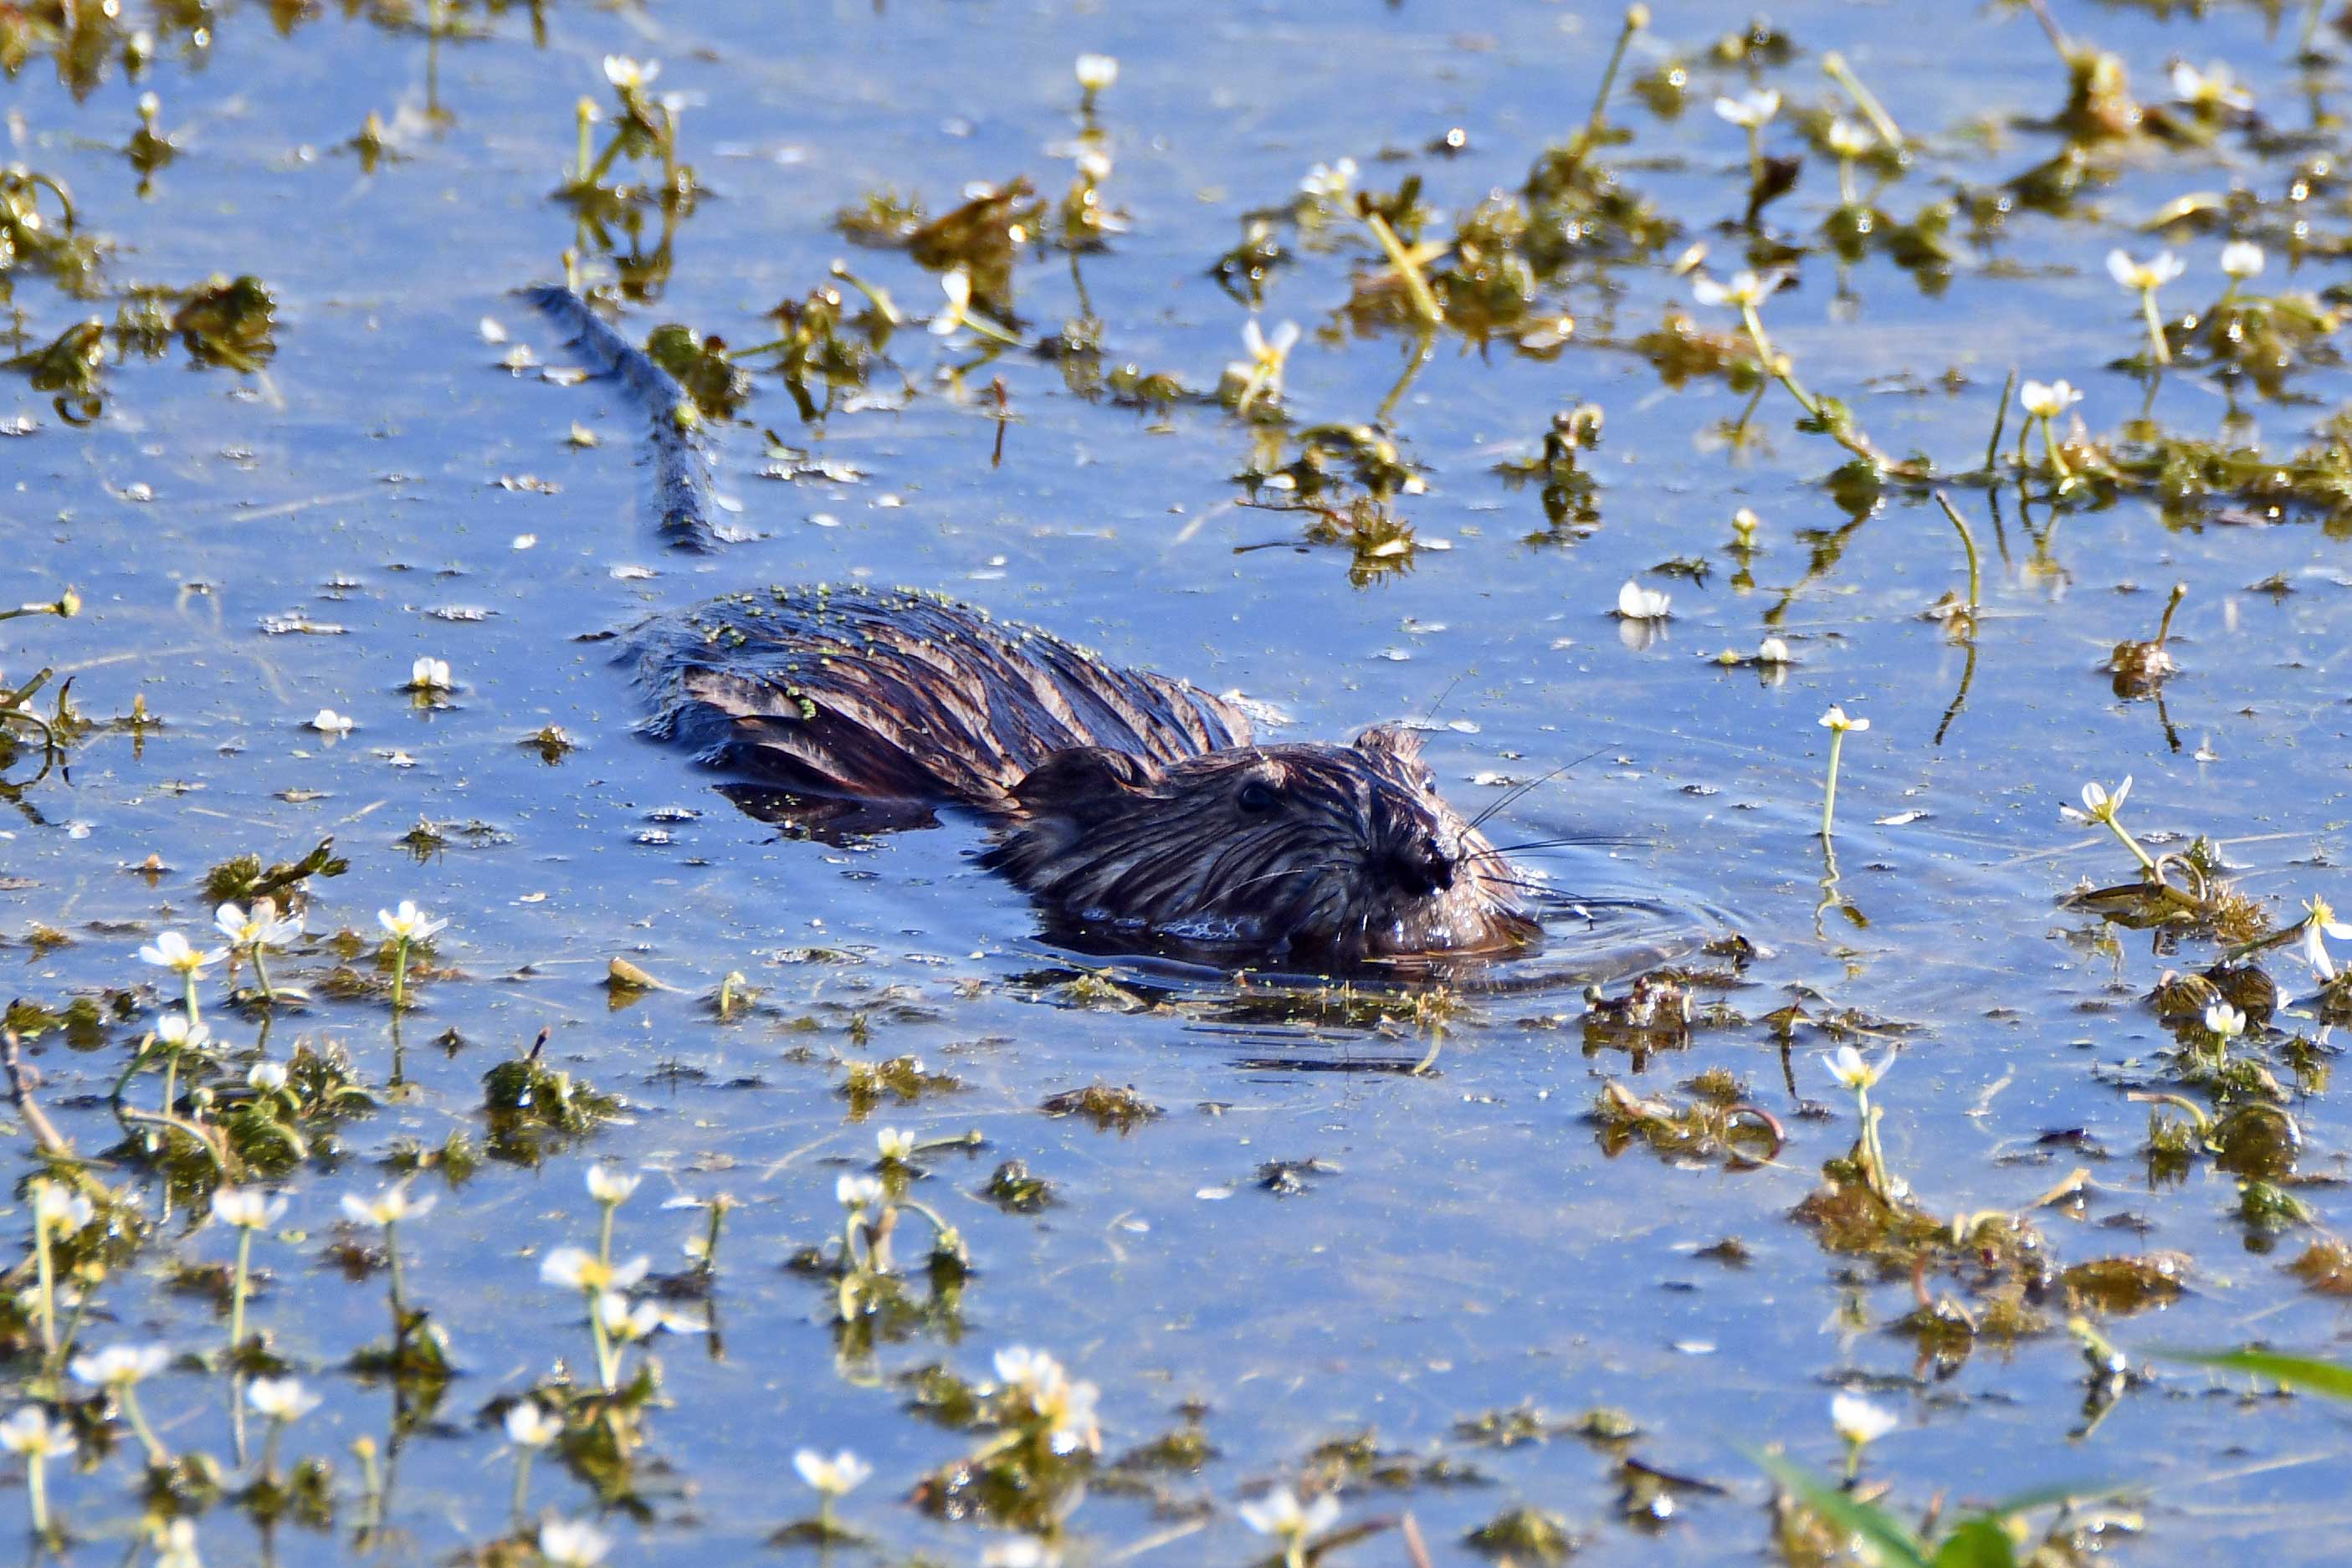 A muskrat poking its head out of water.